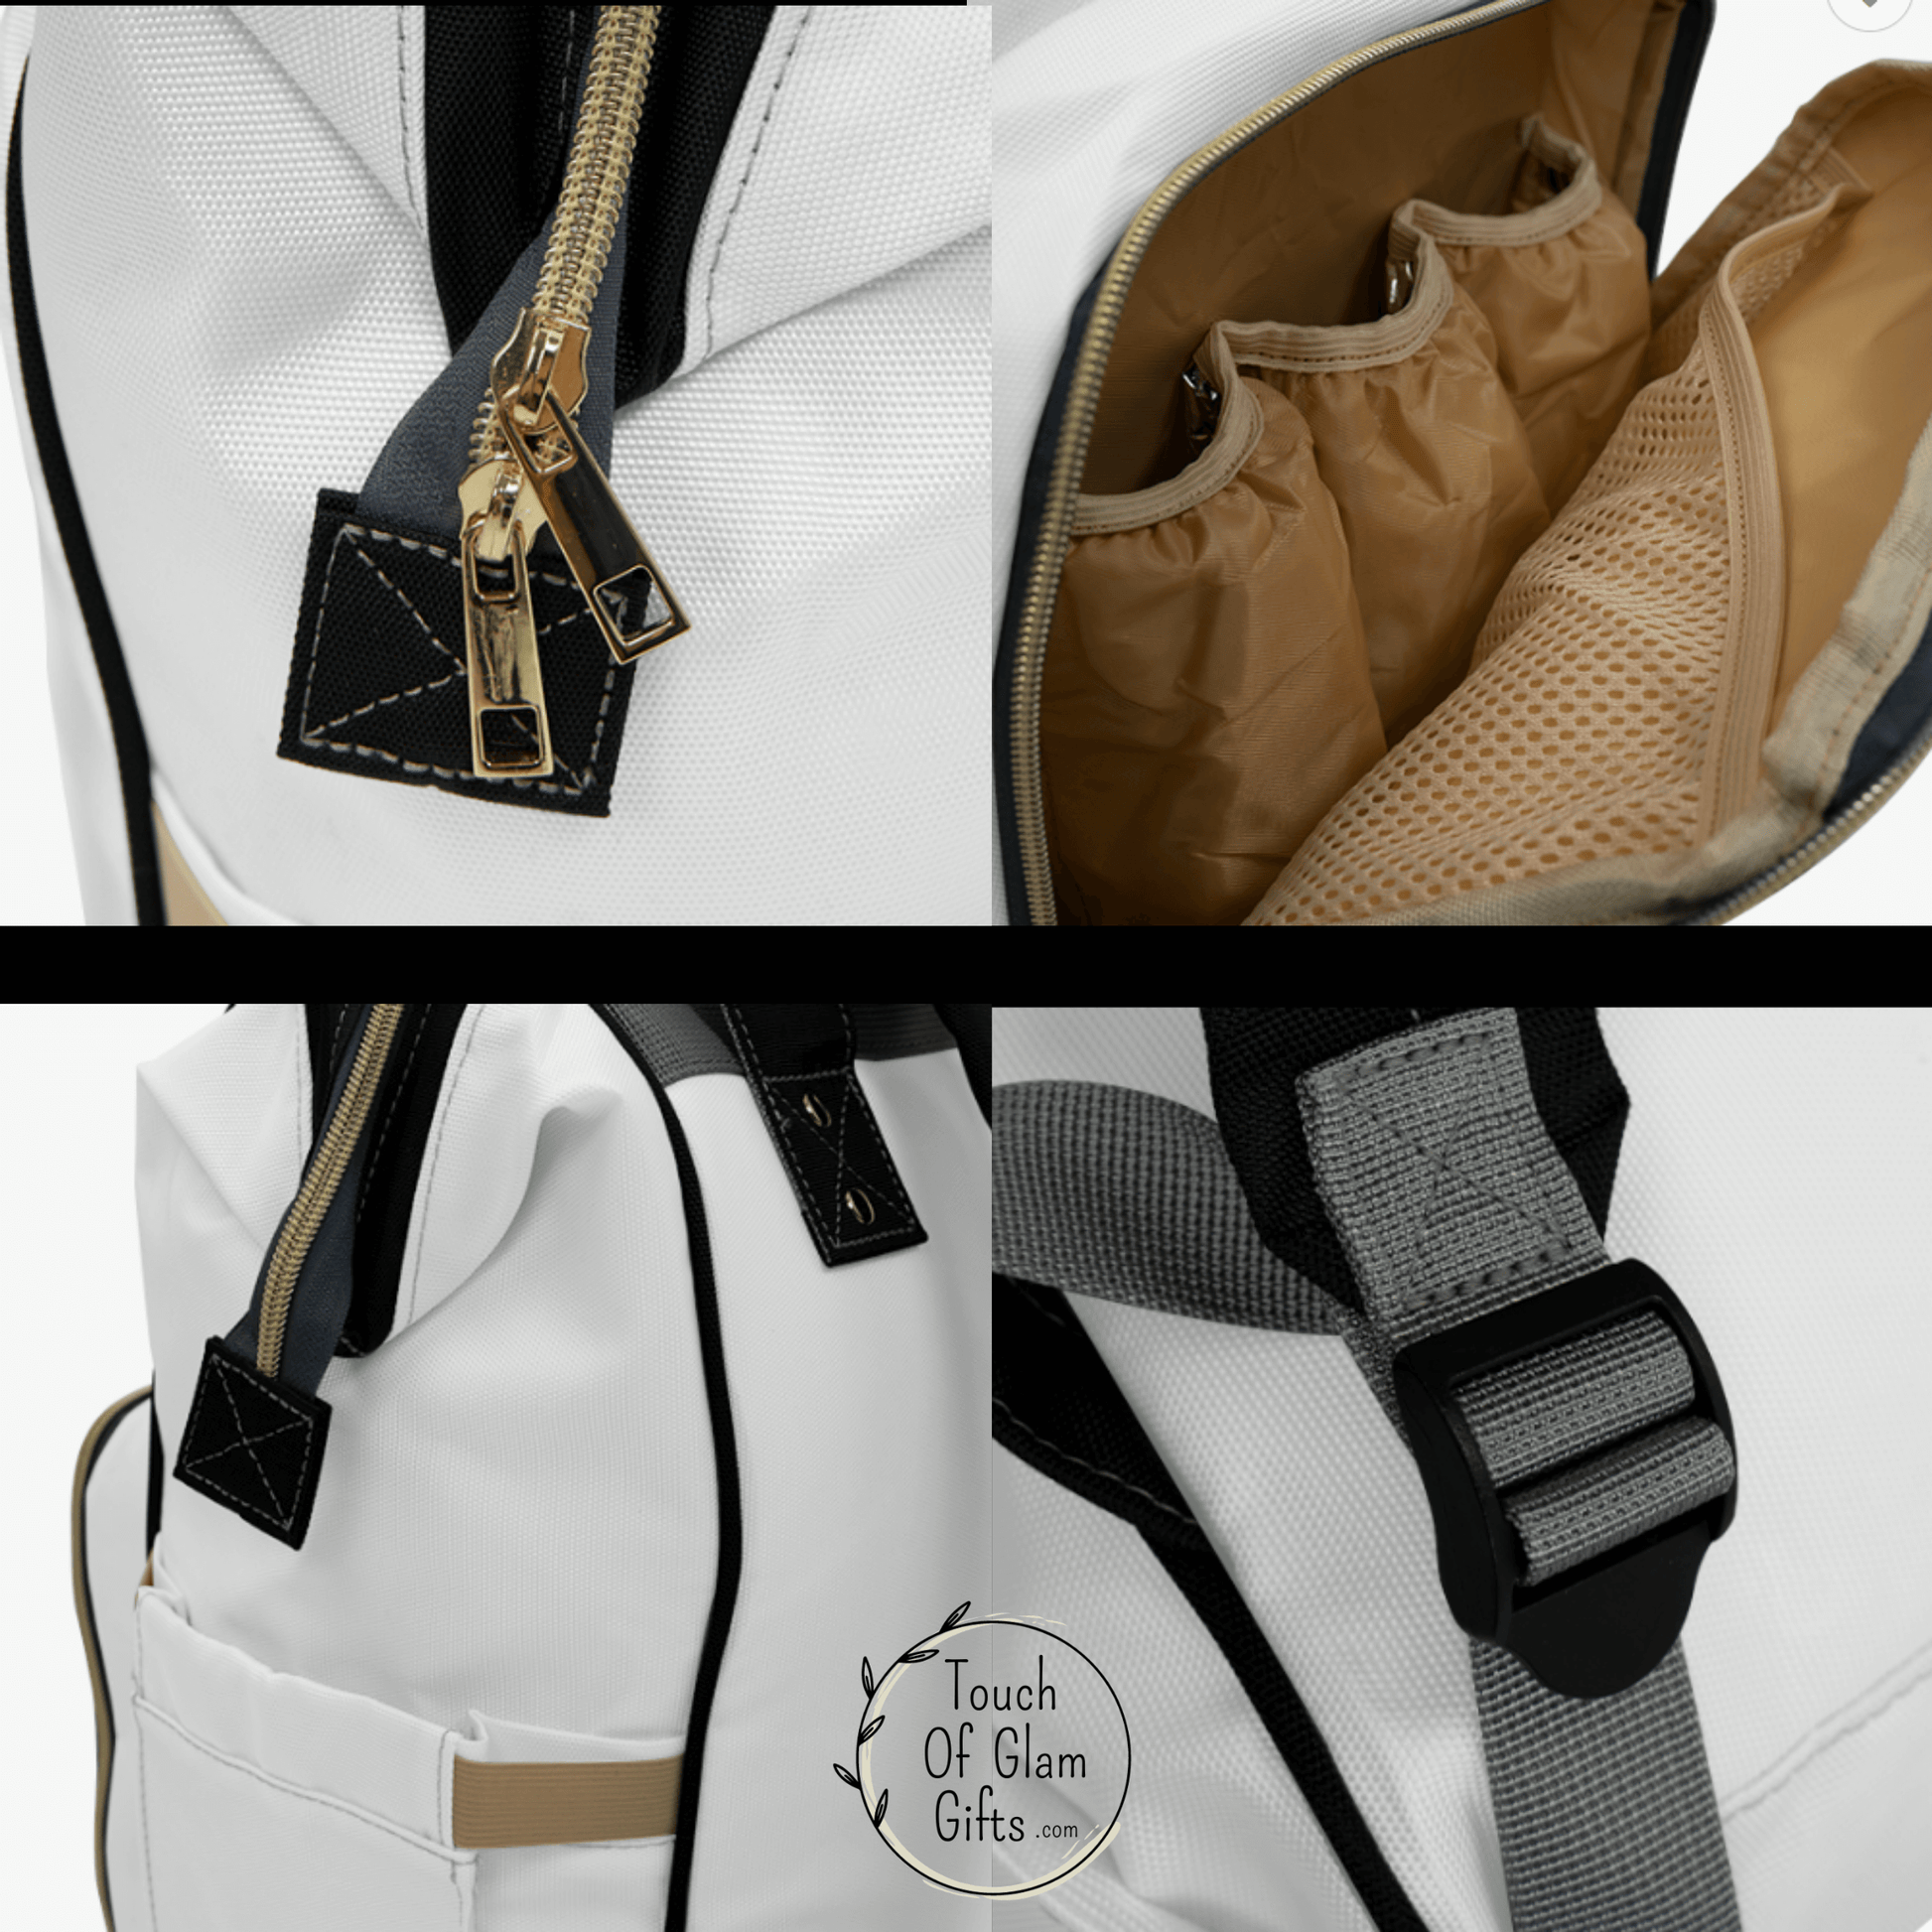 Detail of the gold plated zipper and storage pouches in the exterior zippered pocket and grey color adjustable straps.